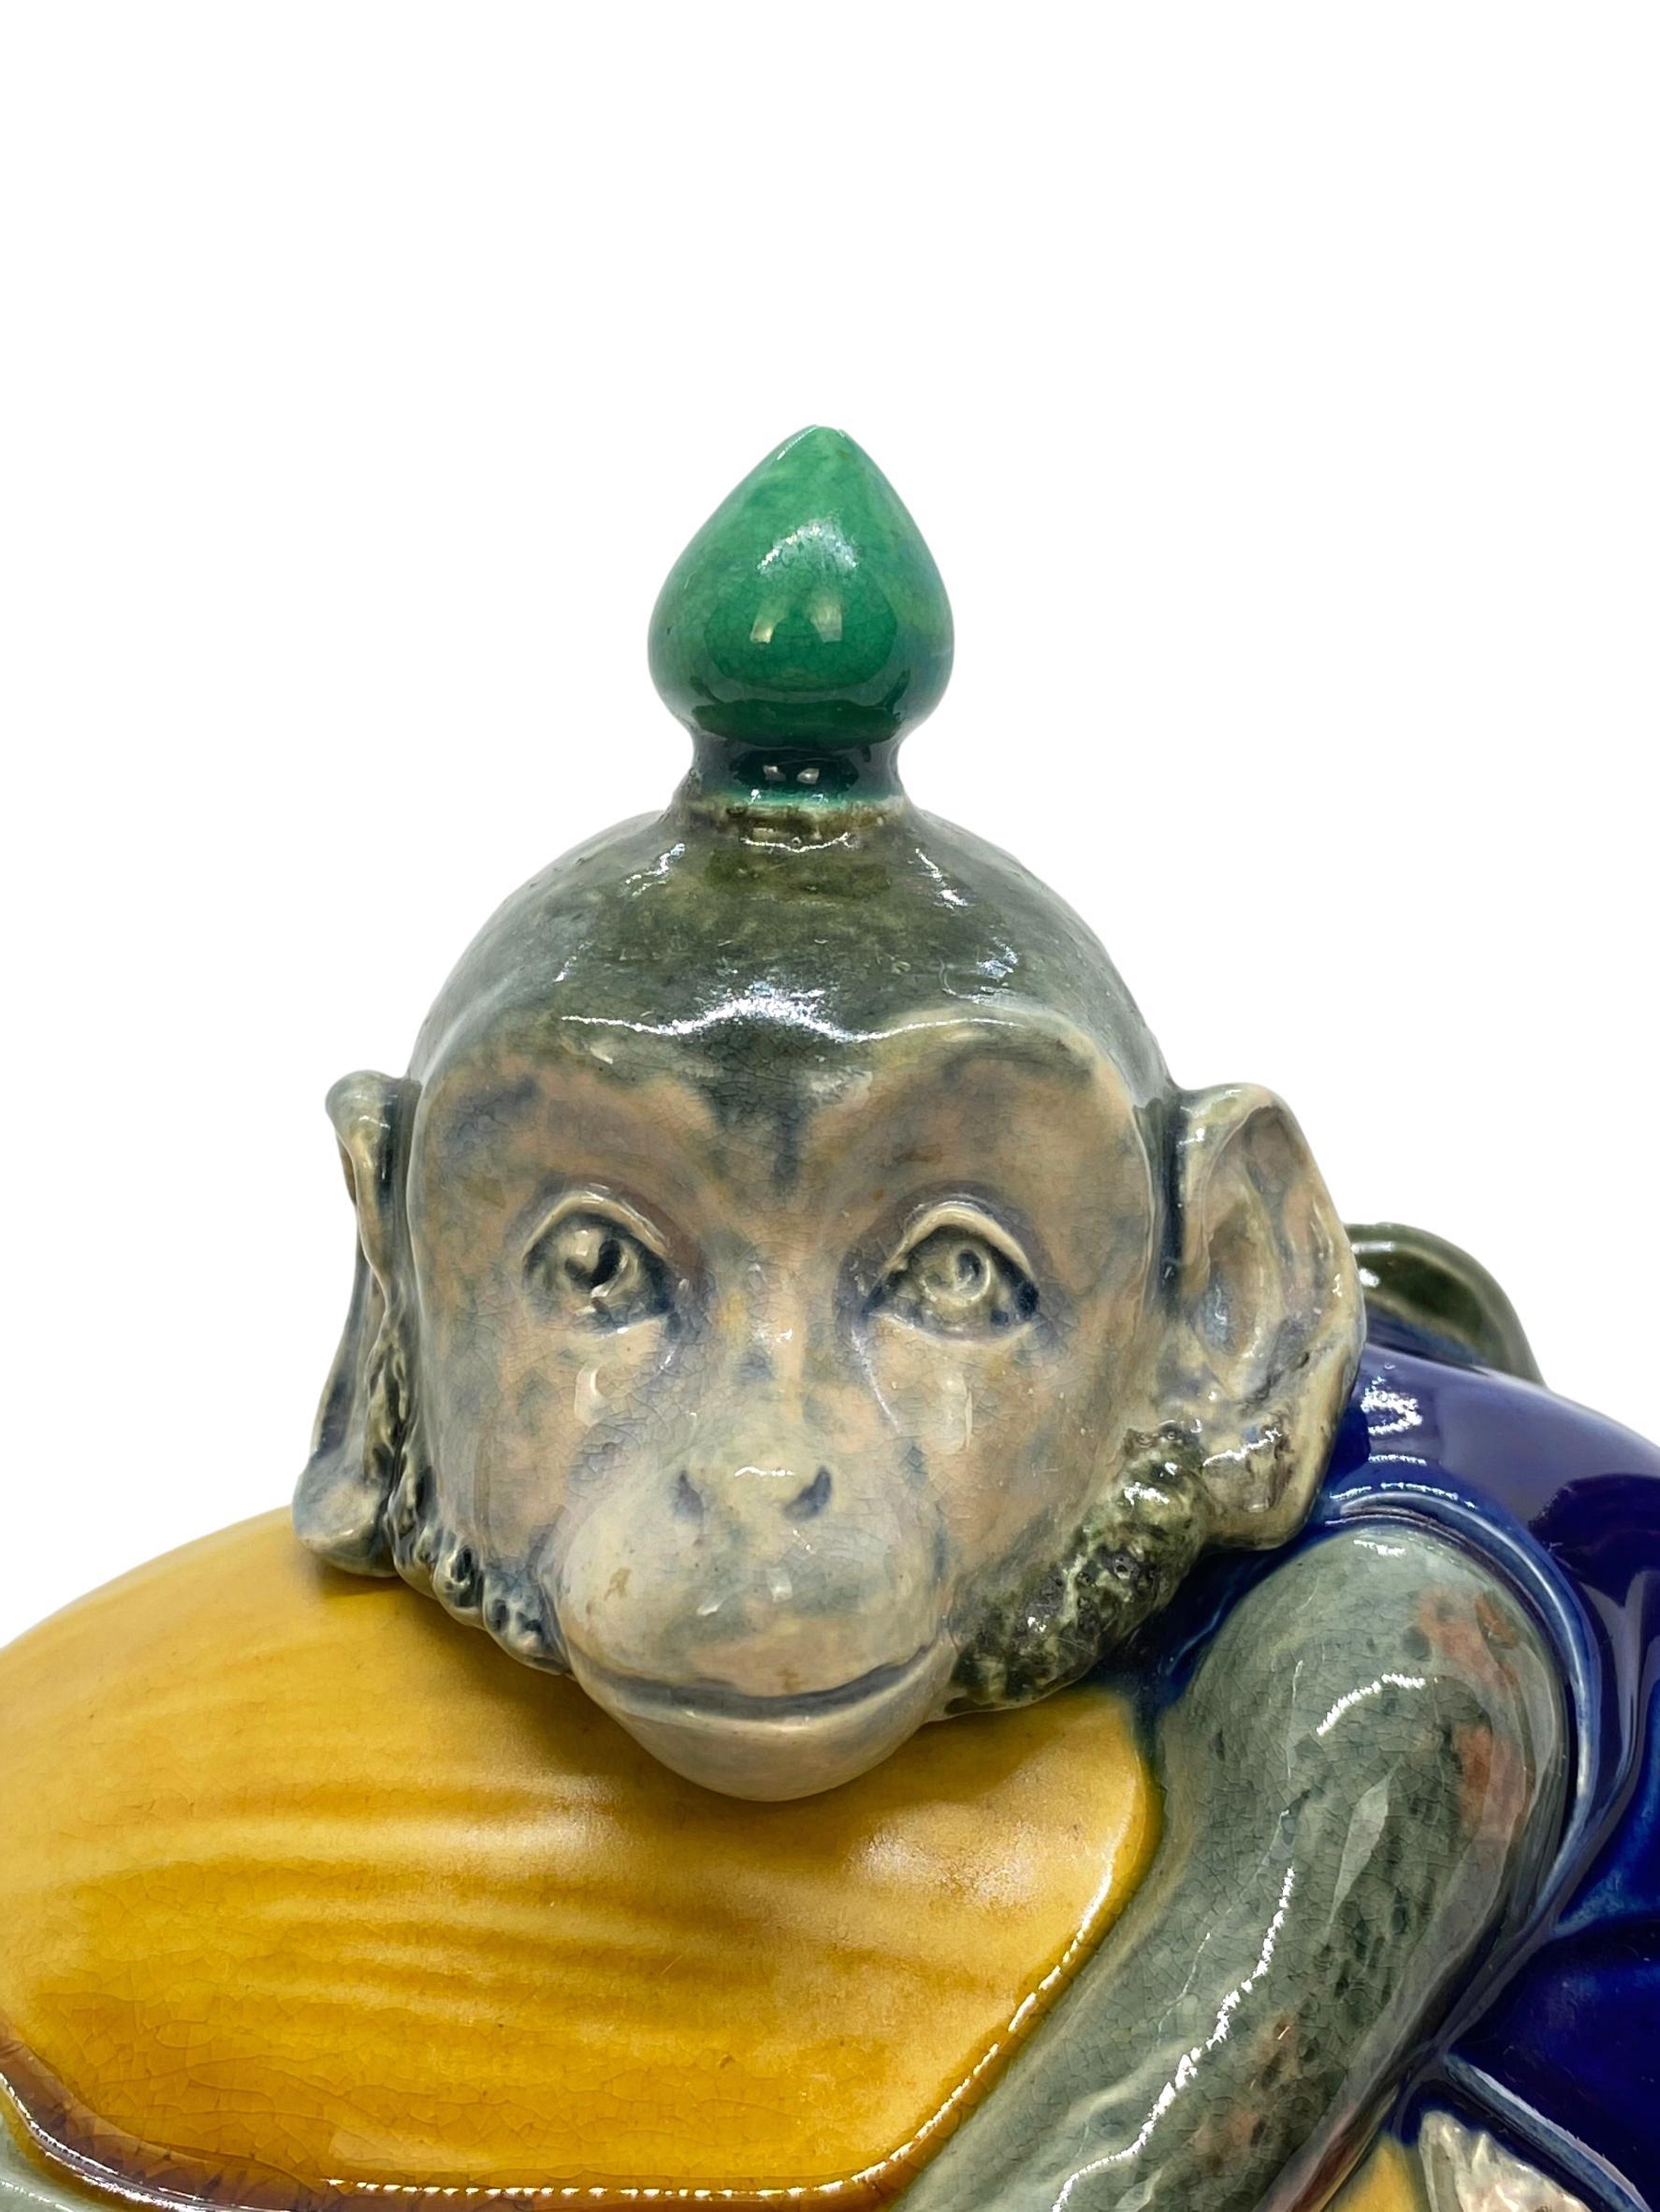 Molded Minton Majolica Teapot, Beautifully Glazed Monkey with a Coconut, Dated 1874